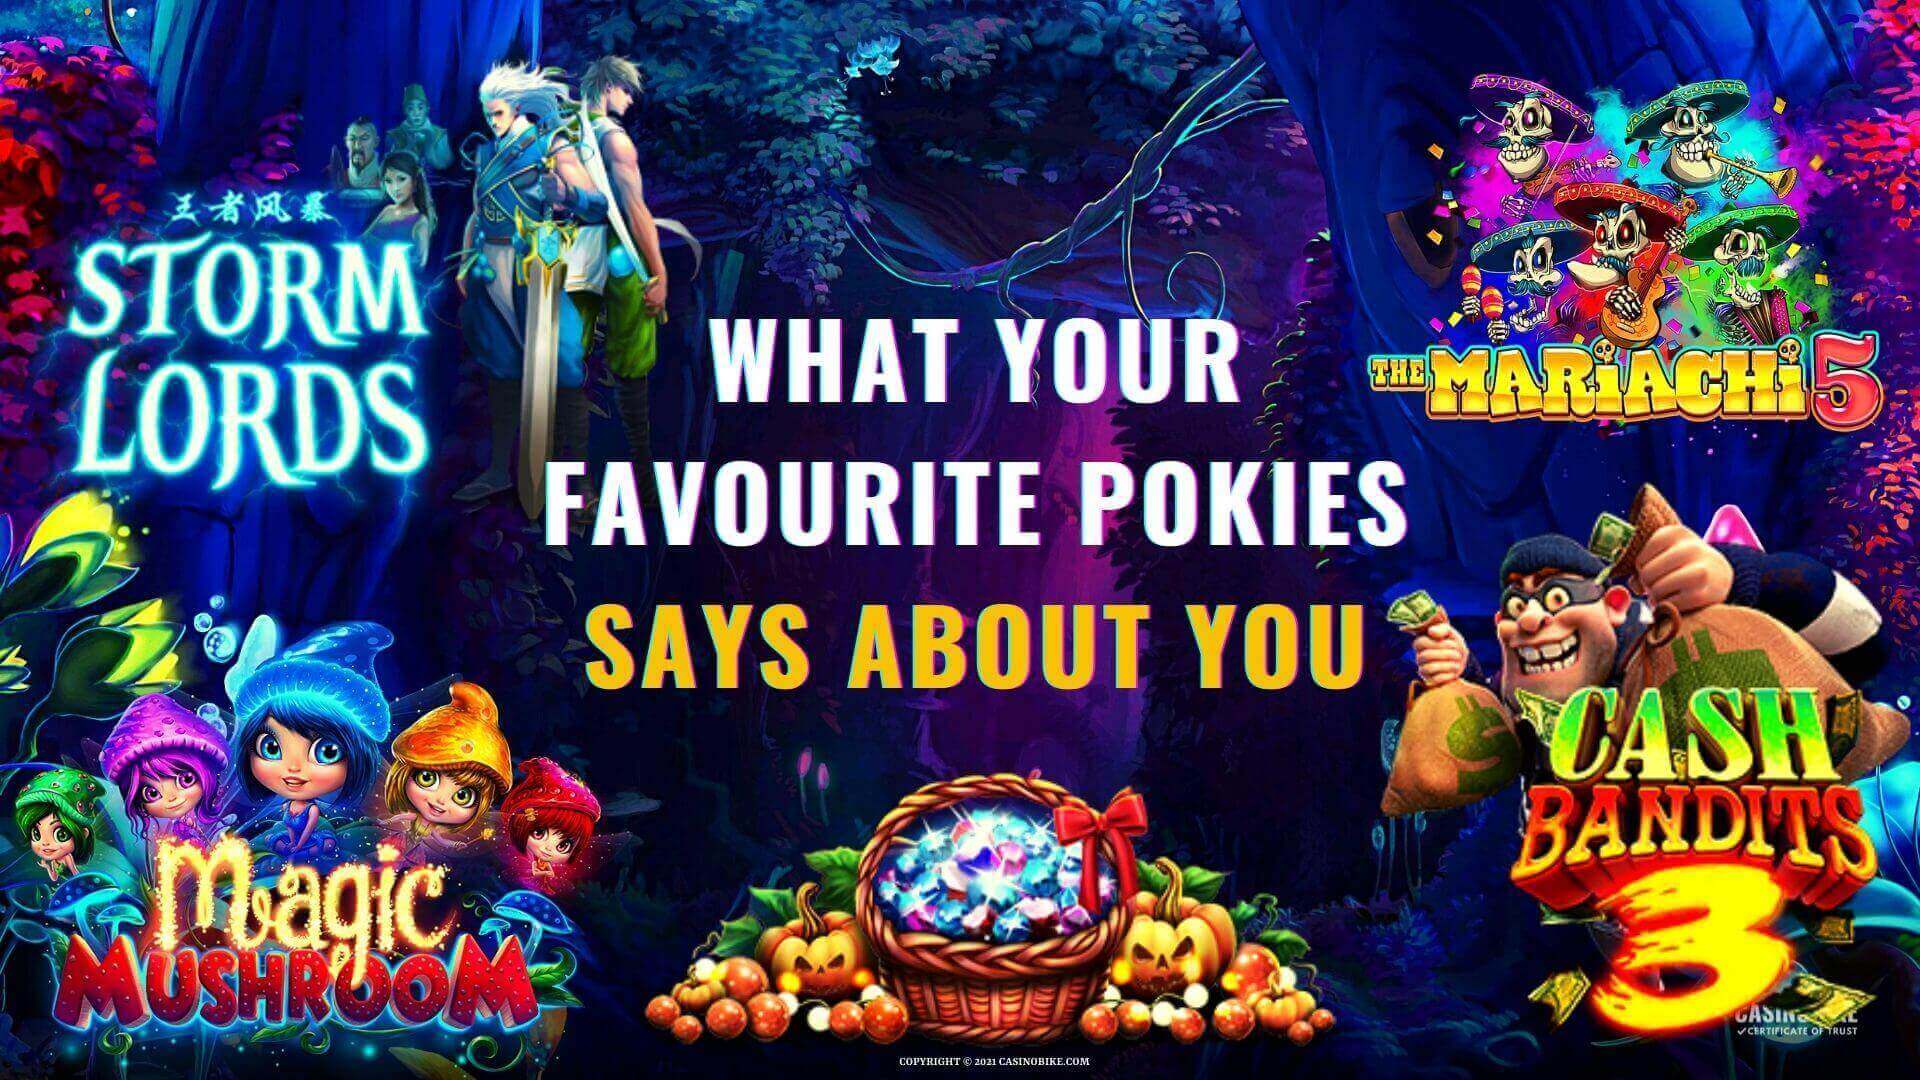 What your favourite pokies says about you